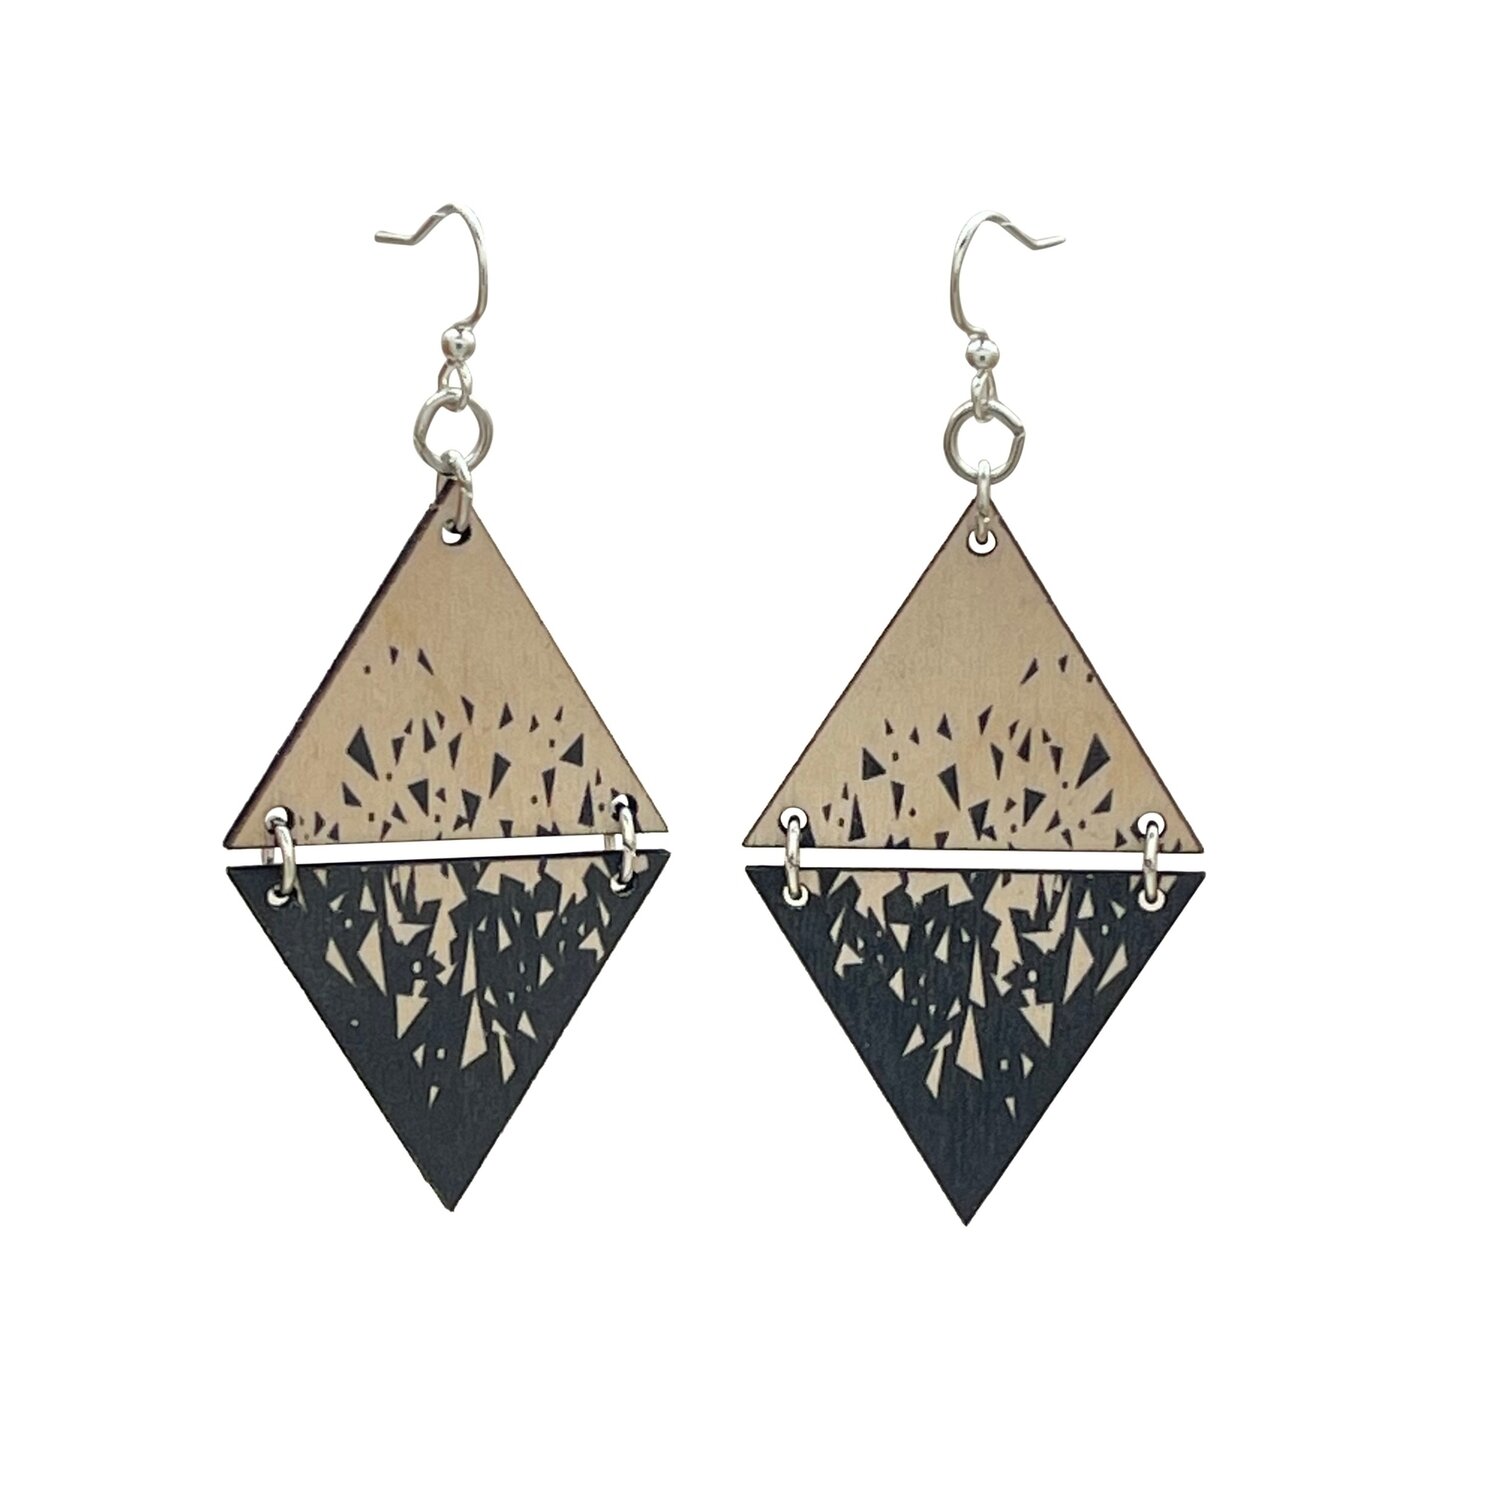 Shattered Triangle Earrings